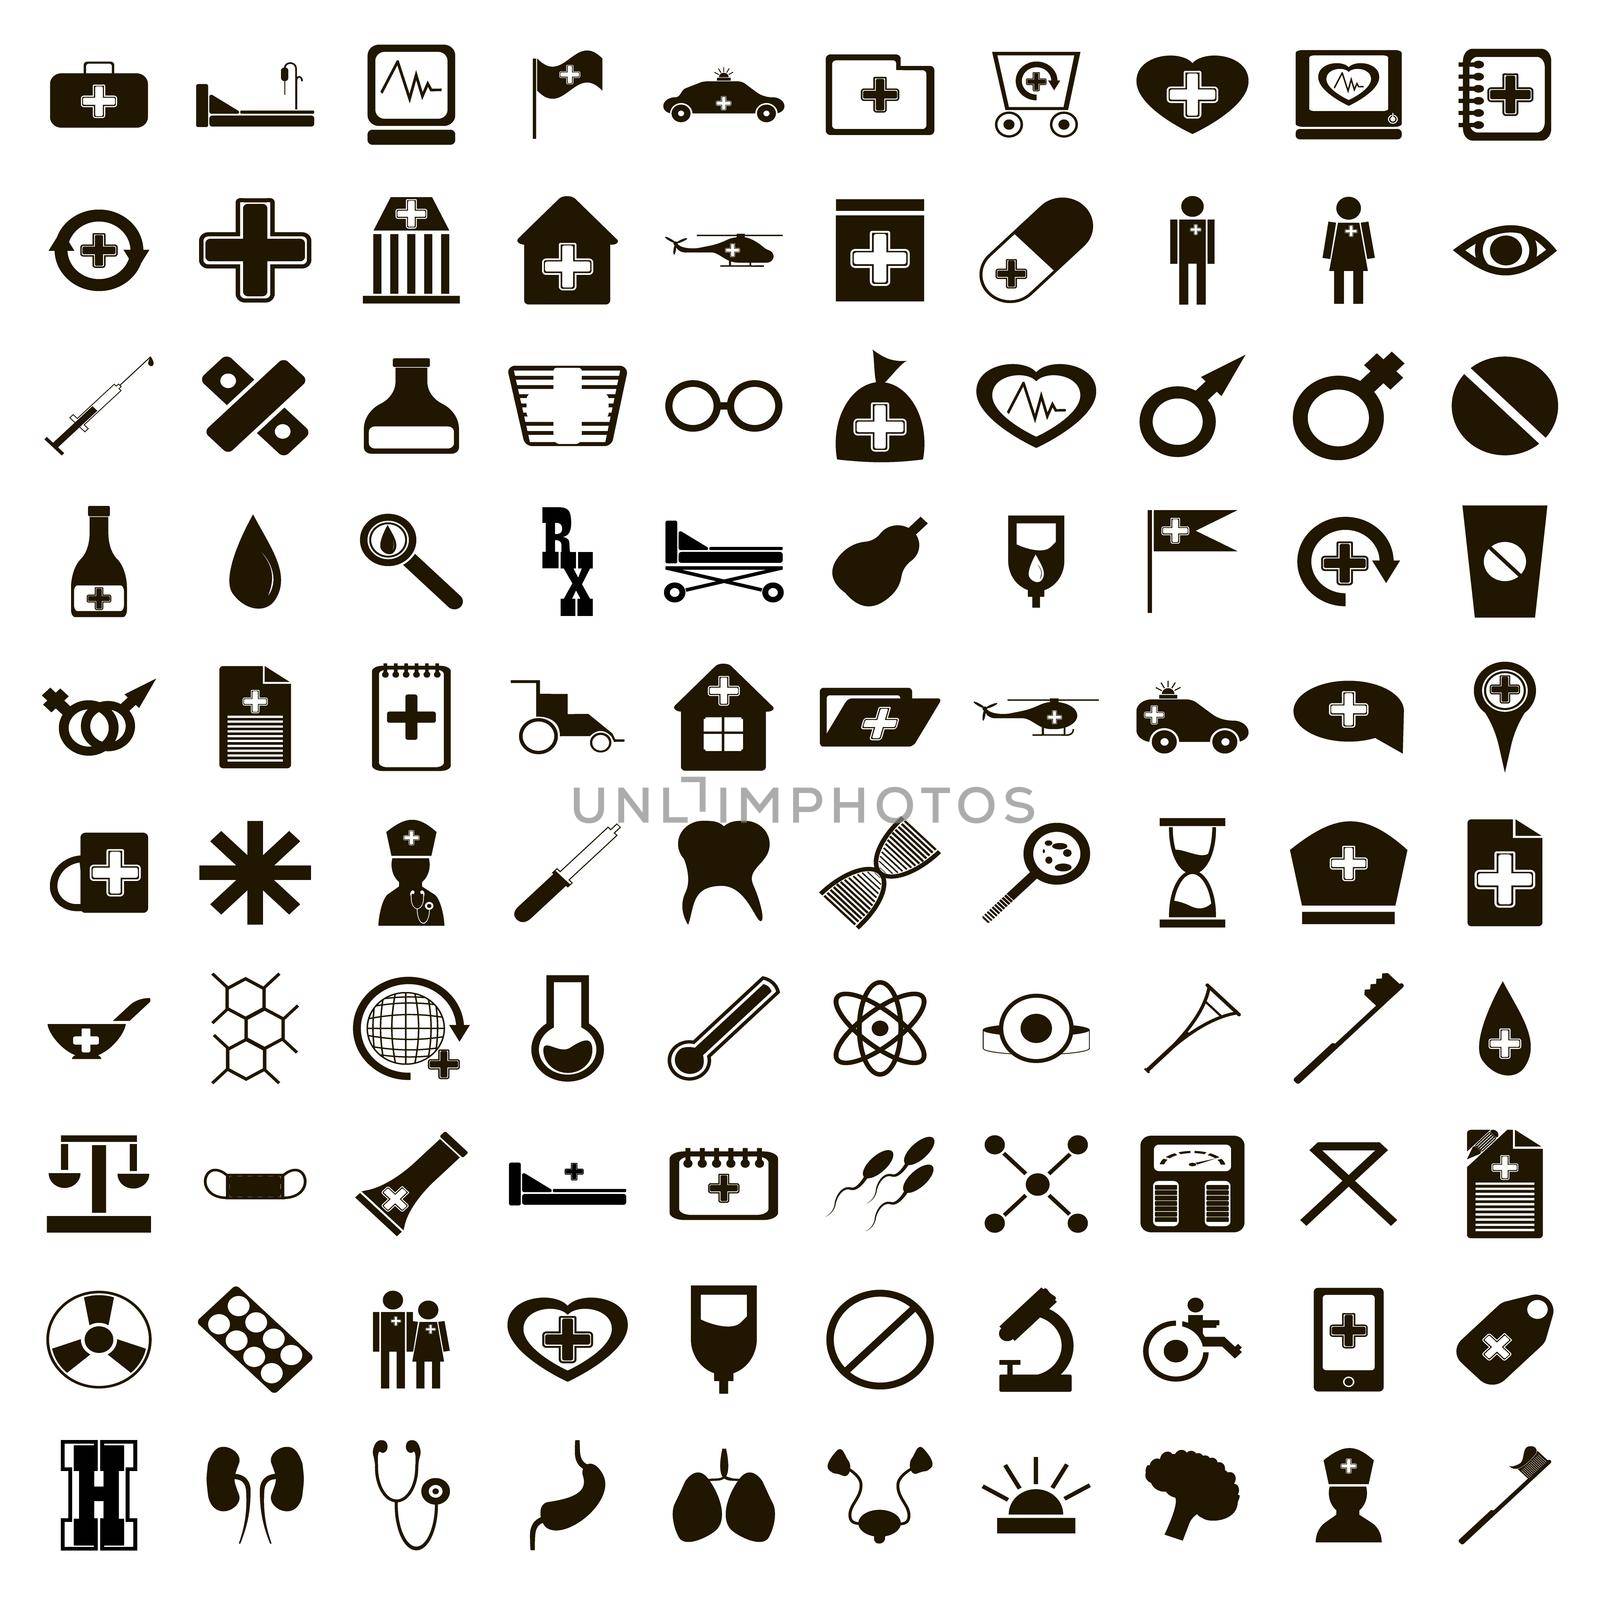 100 medicine icons set in simple style on a white background